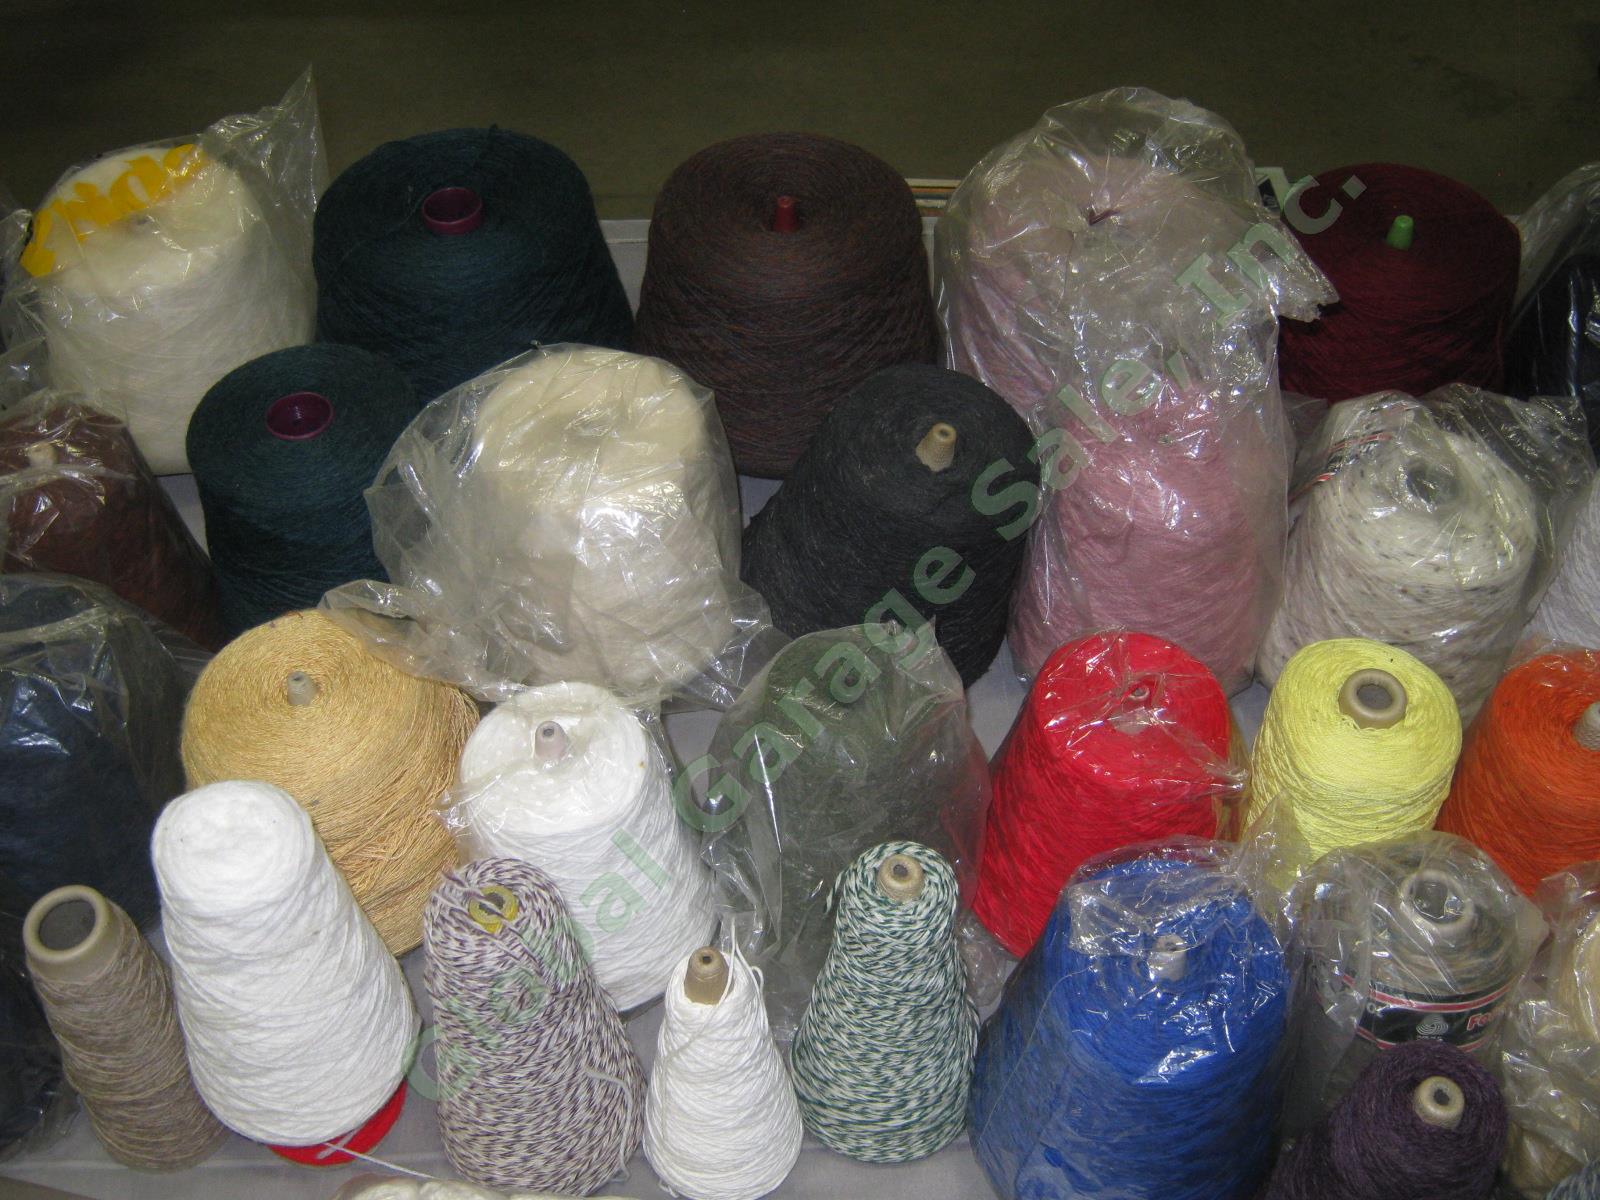 HUGE KNITTING YARN LOT Assorted Colors 1lb 2lb 3lb Wool Cotton Cone Skein ~35lbs 5